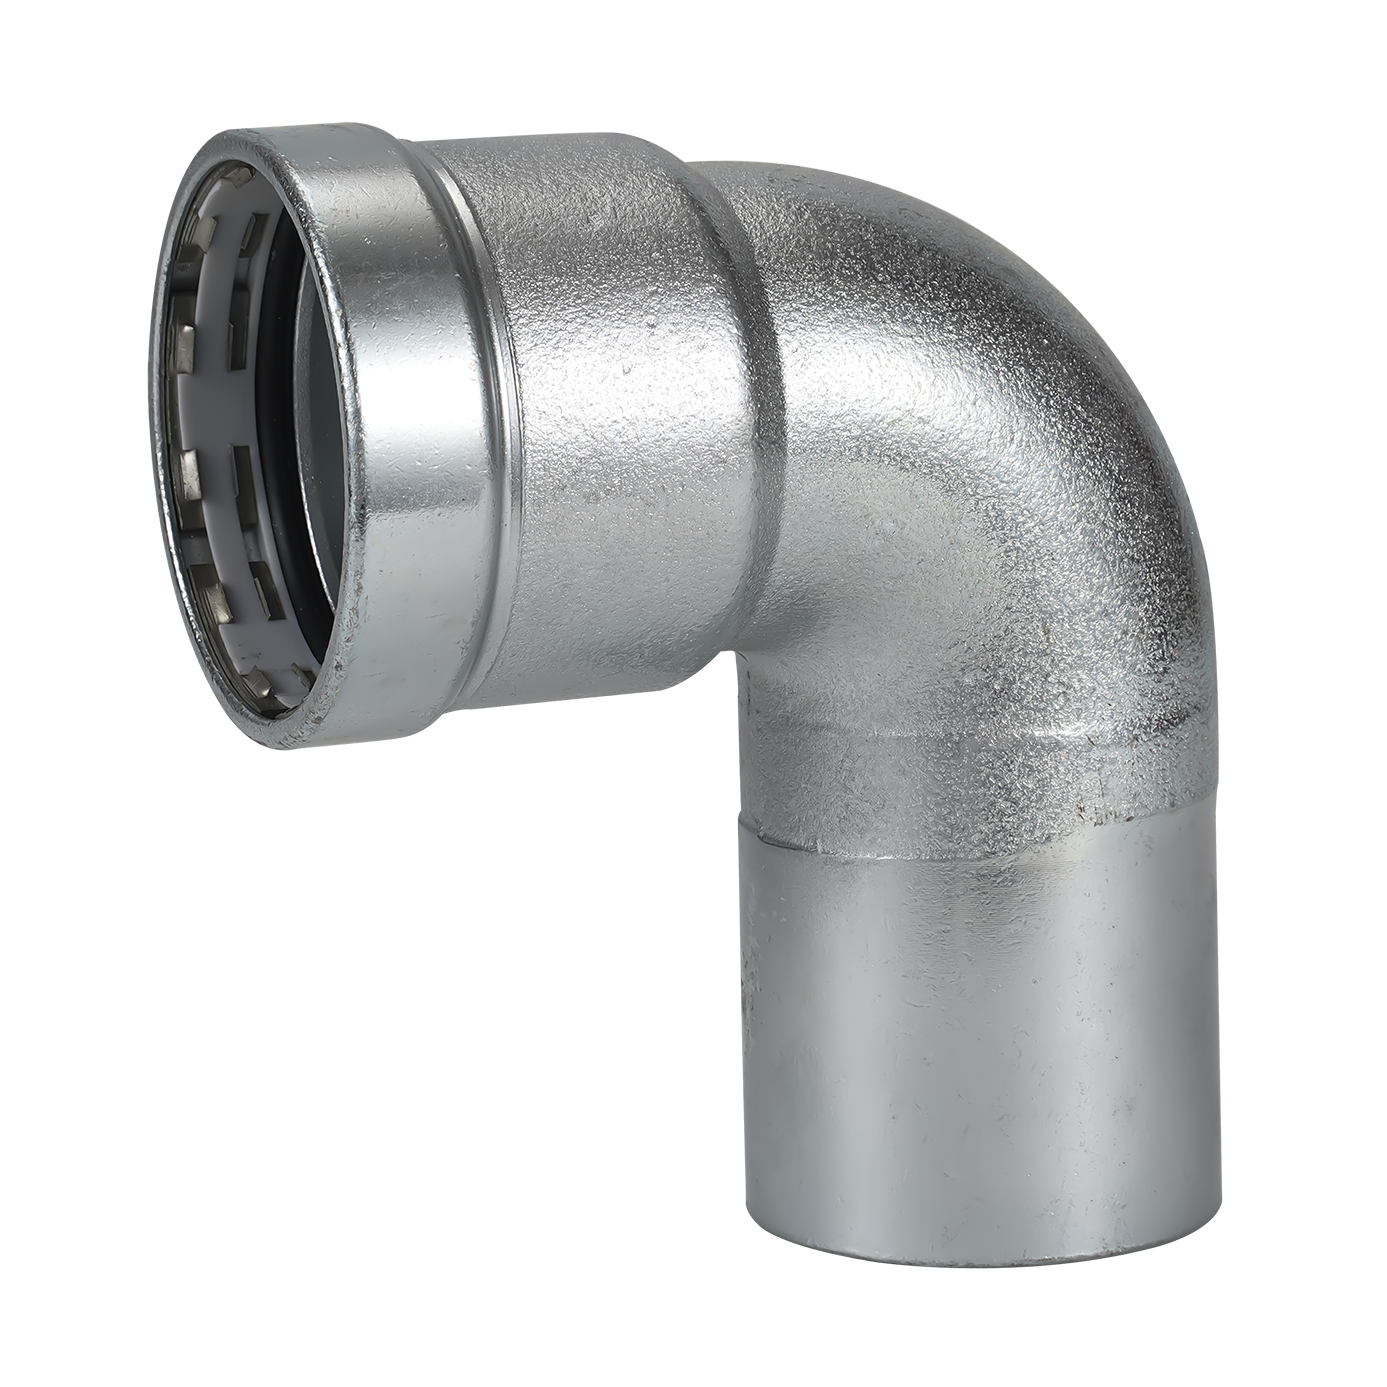 LC-Press Carbon steel Press fittings for thick-wall steel pipe, 90° Elbow with Plain End, 1-1/2x1-1/2 inch PxFTG